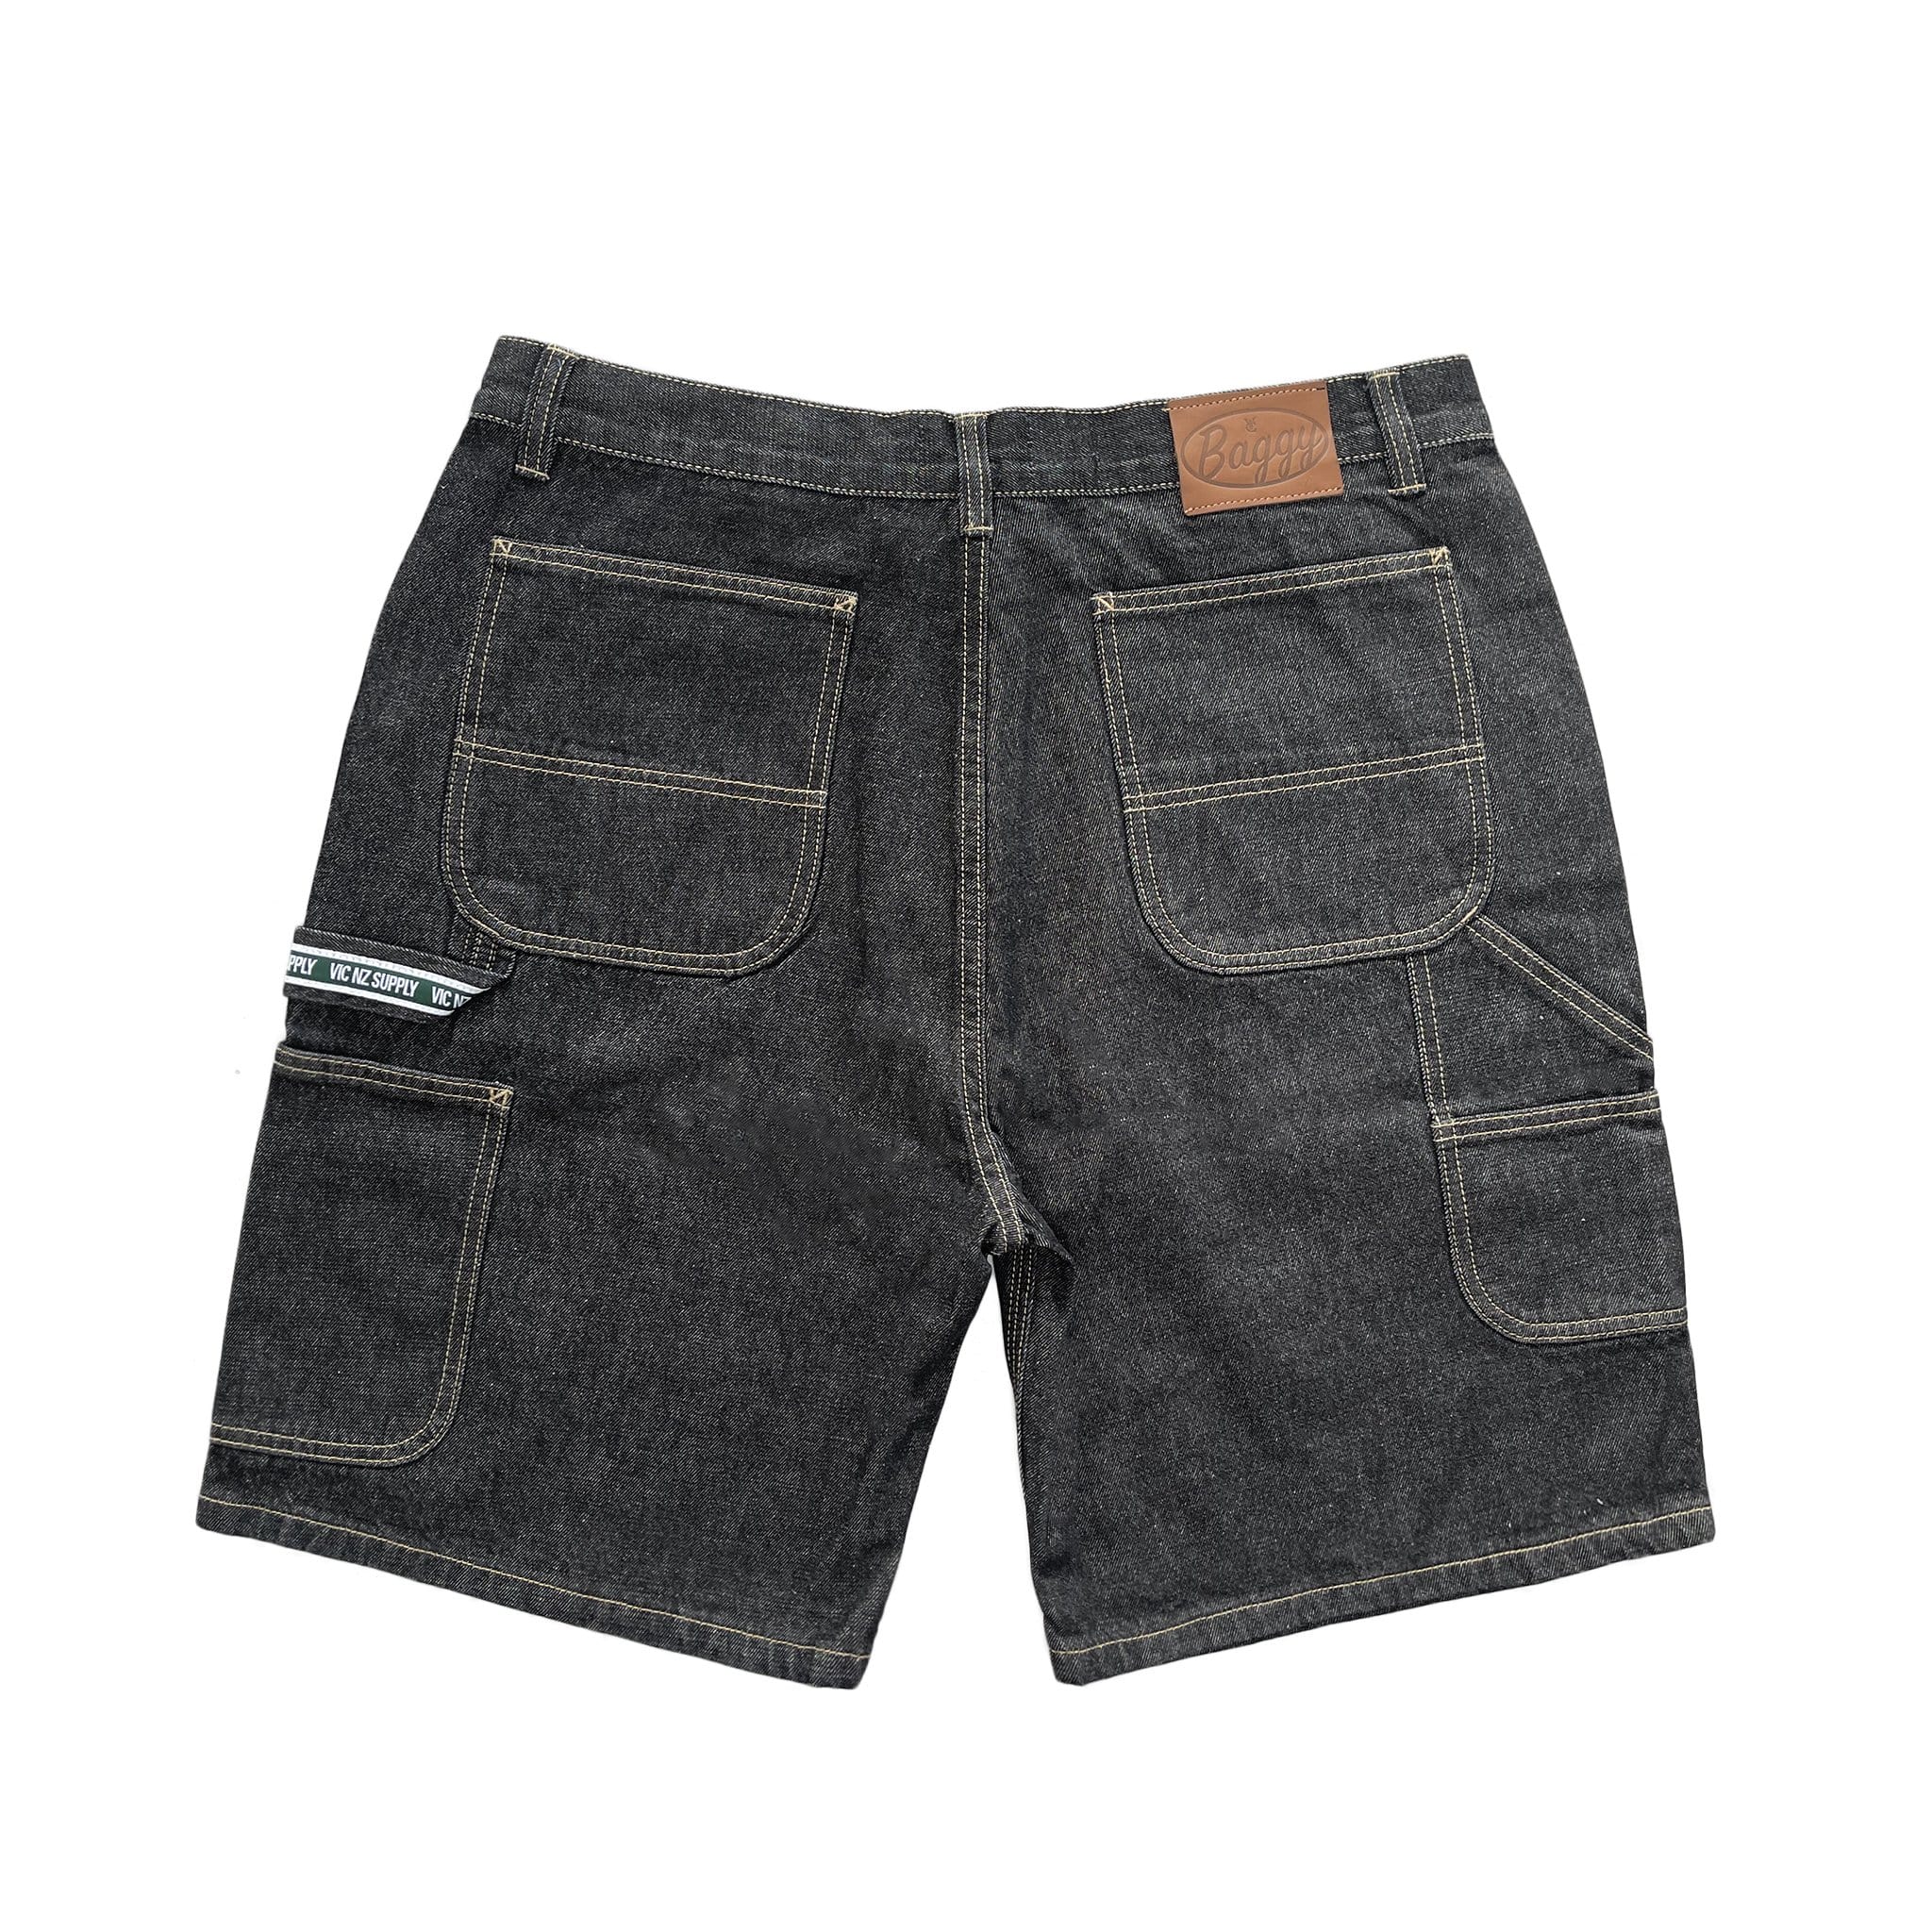 Premium quality carpenter denim jean shorts by New Zealand skate and streetwear clothing label VIC Apparel. Loose fit. Featuring utility pockets and triple needle contrast stitching with VIC label flag at the back right pocket. Classic vintage workwear style. 90s baggy jorts style